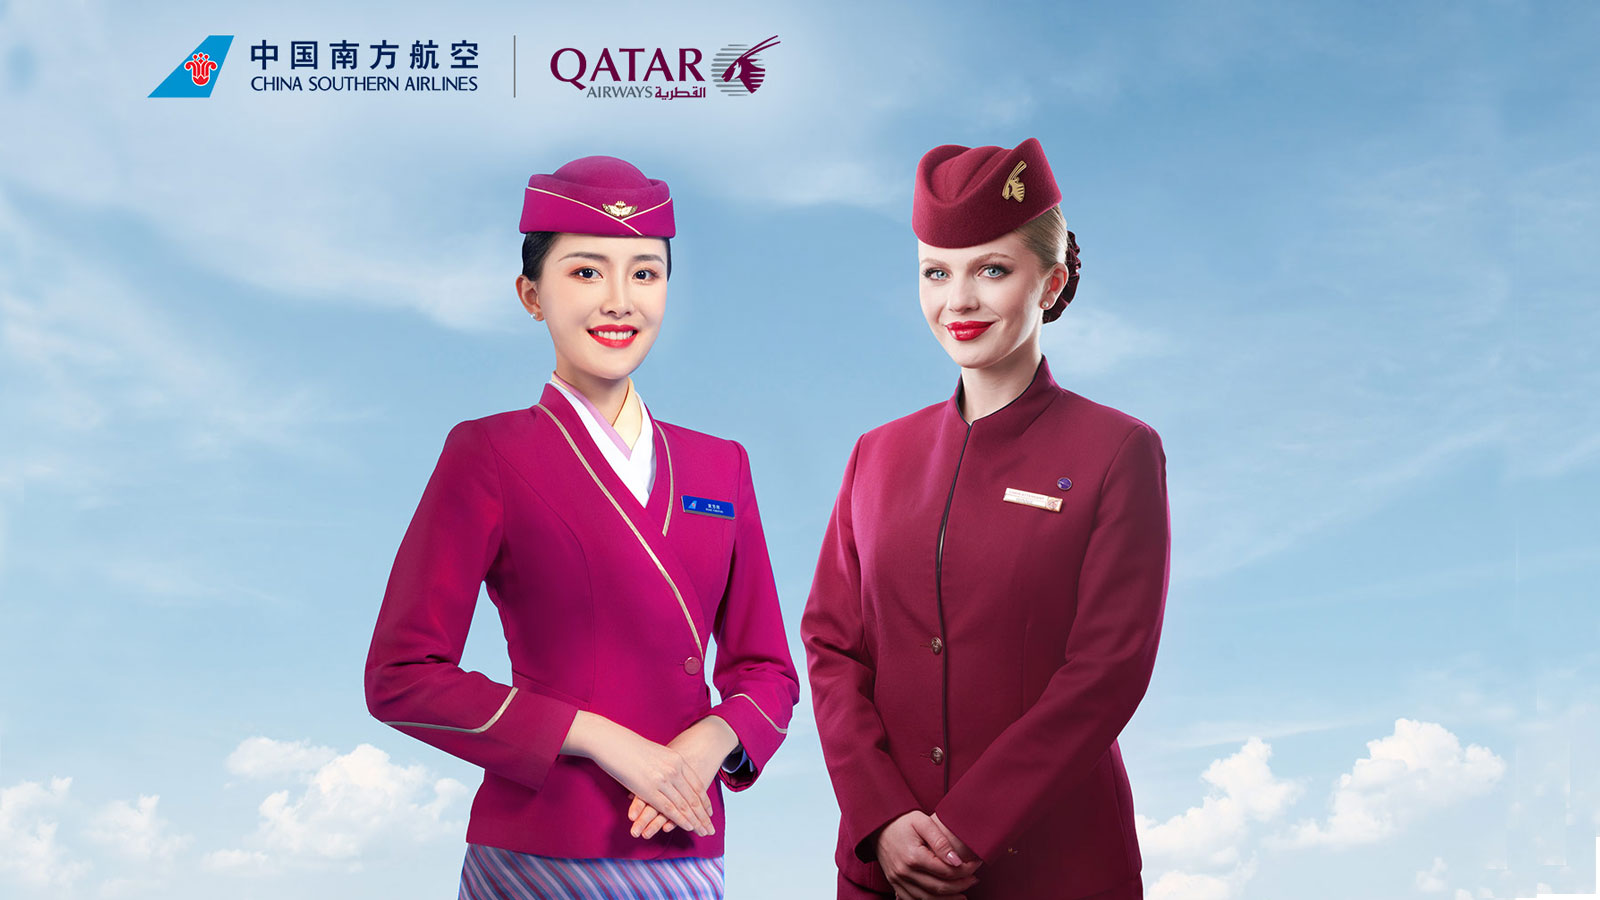 Qatar-Airways-China-Southern-Airlines